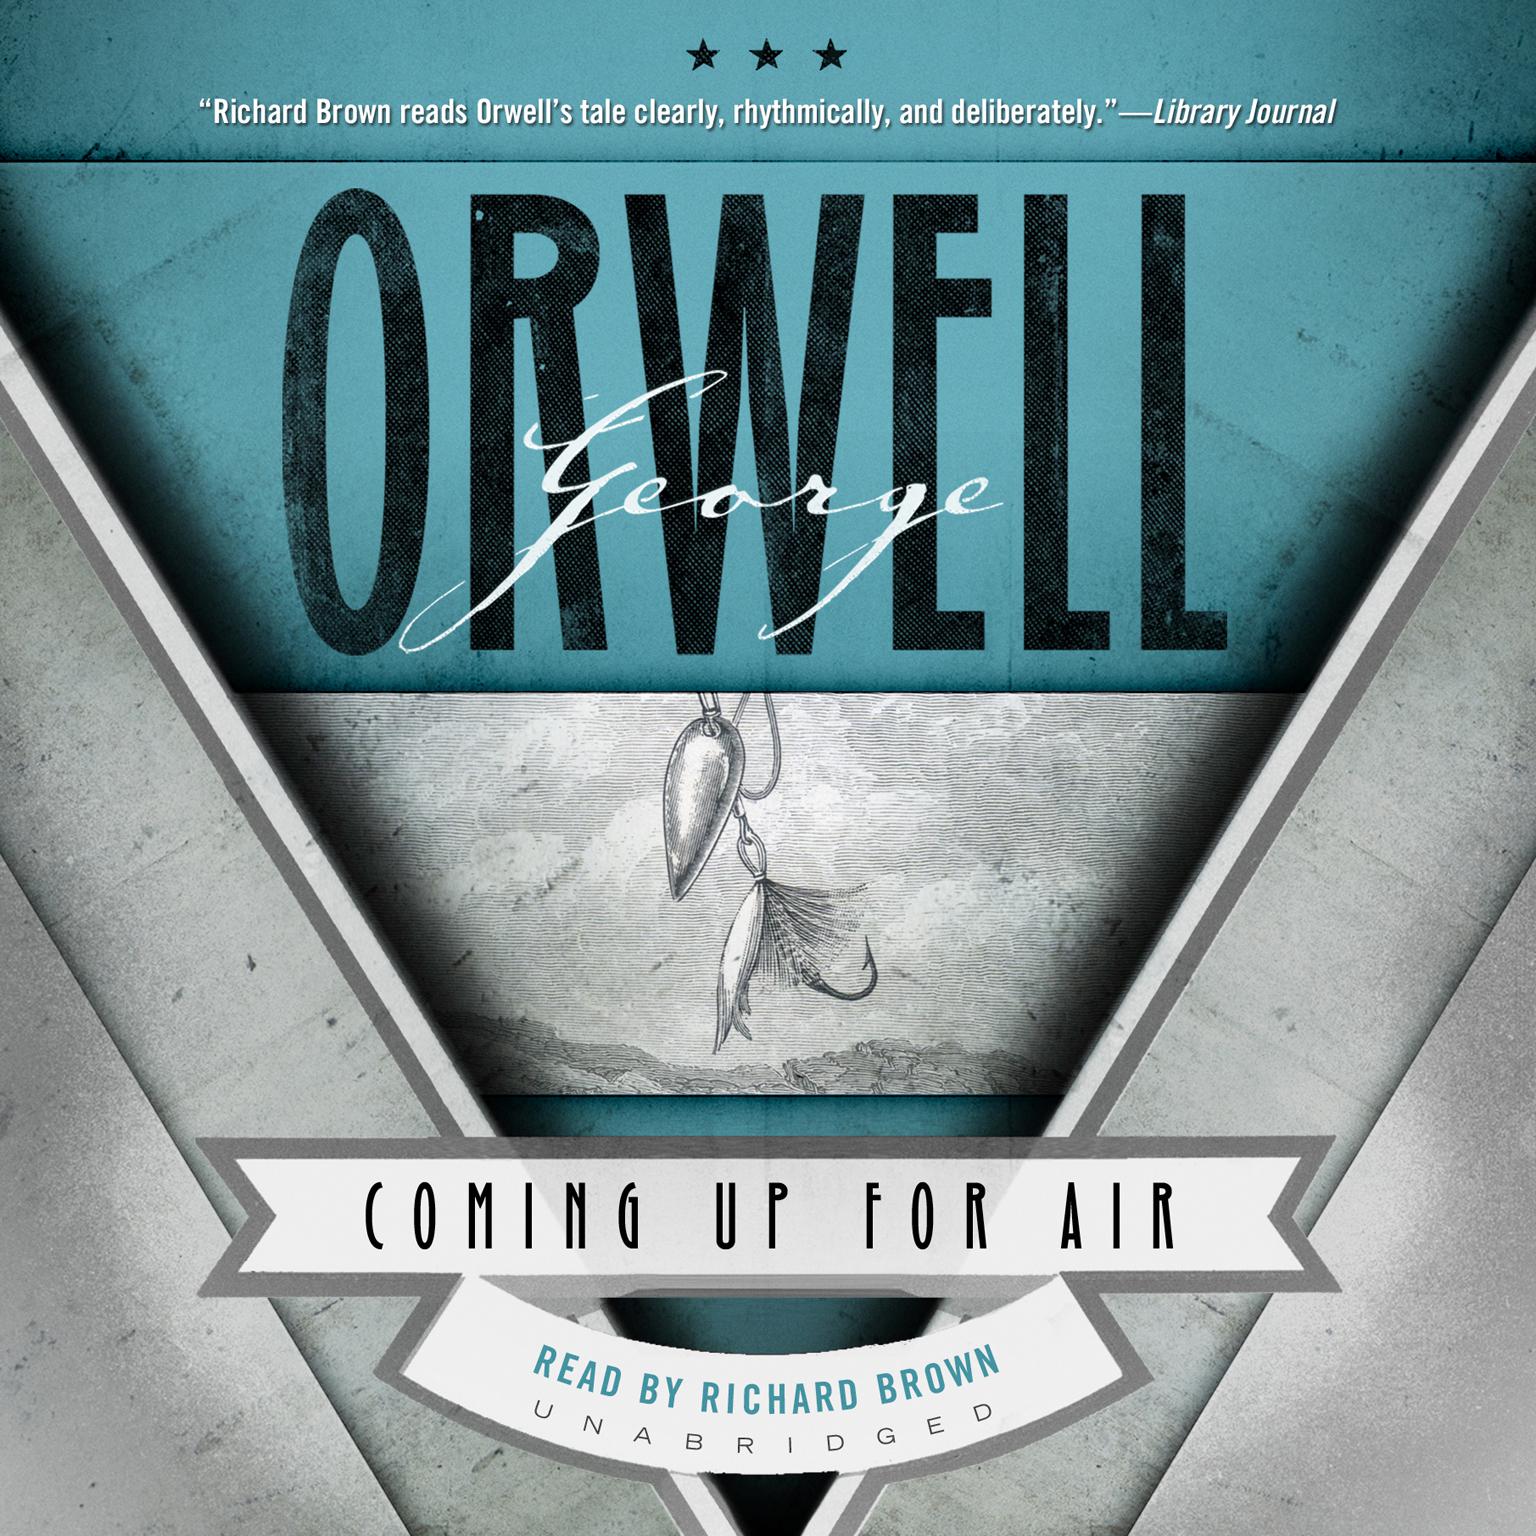 Coming Up for Air Audiobook by George Orwell — Listen Now